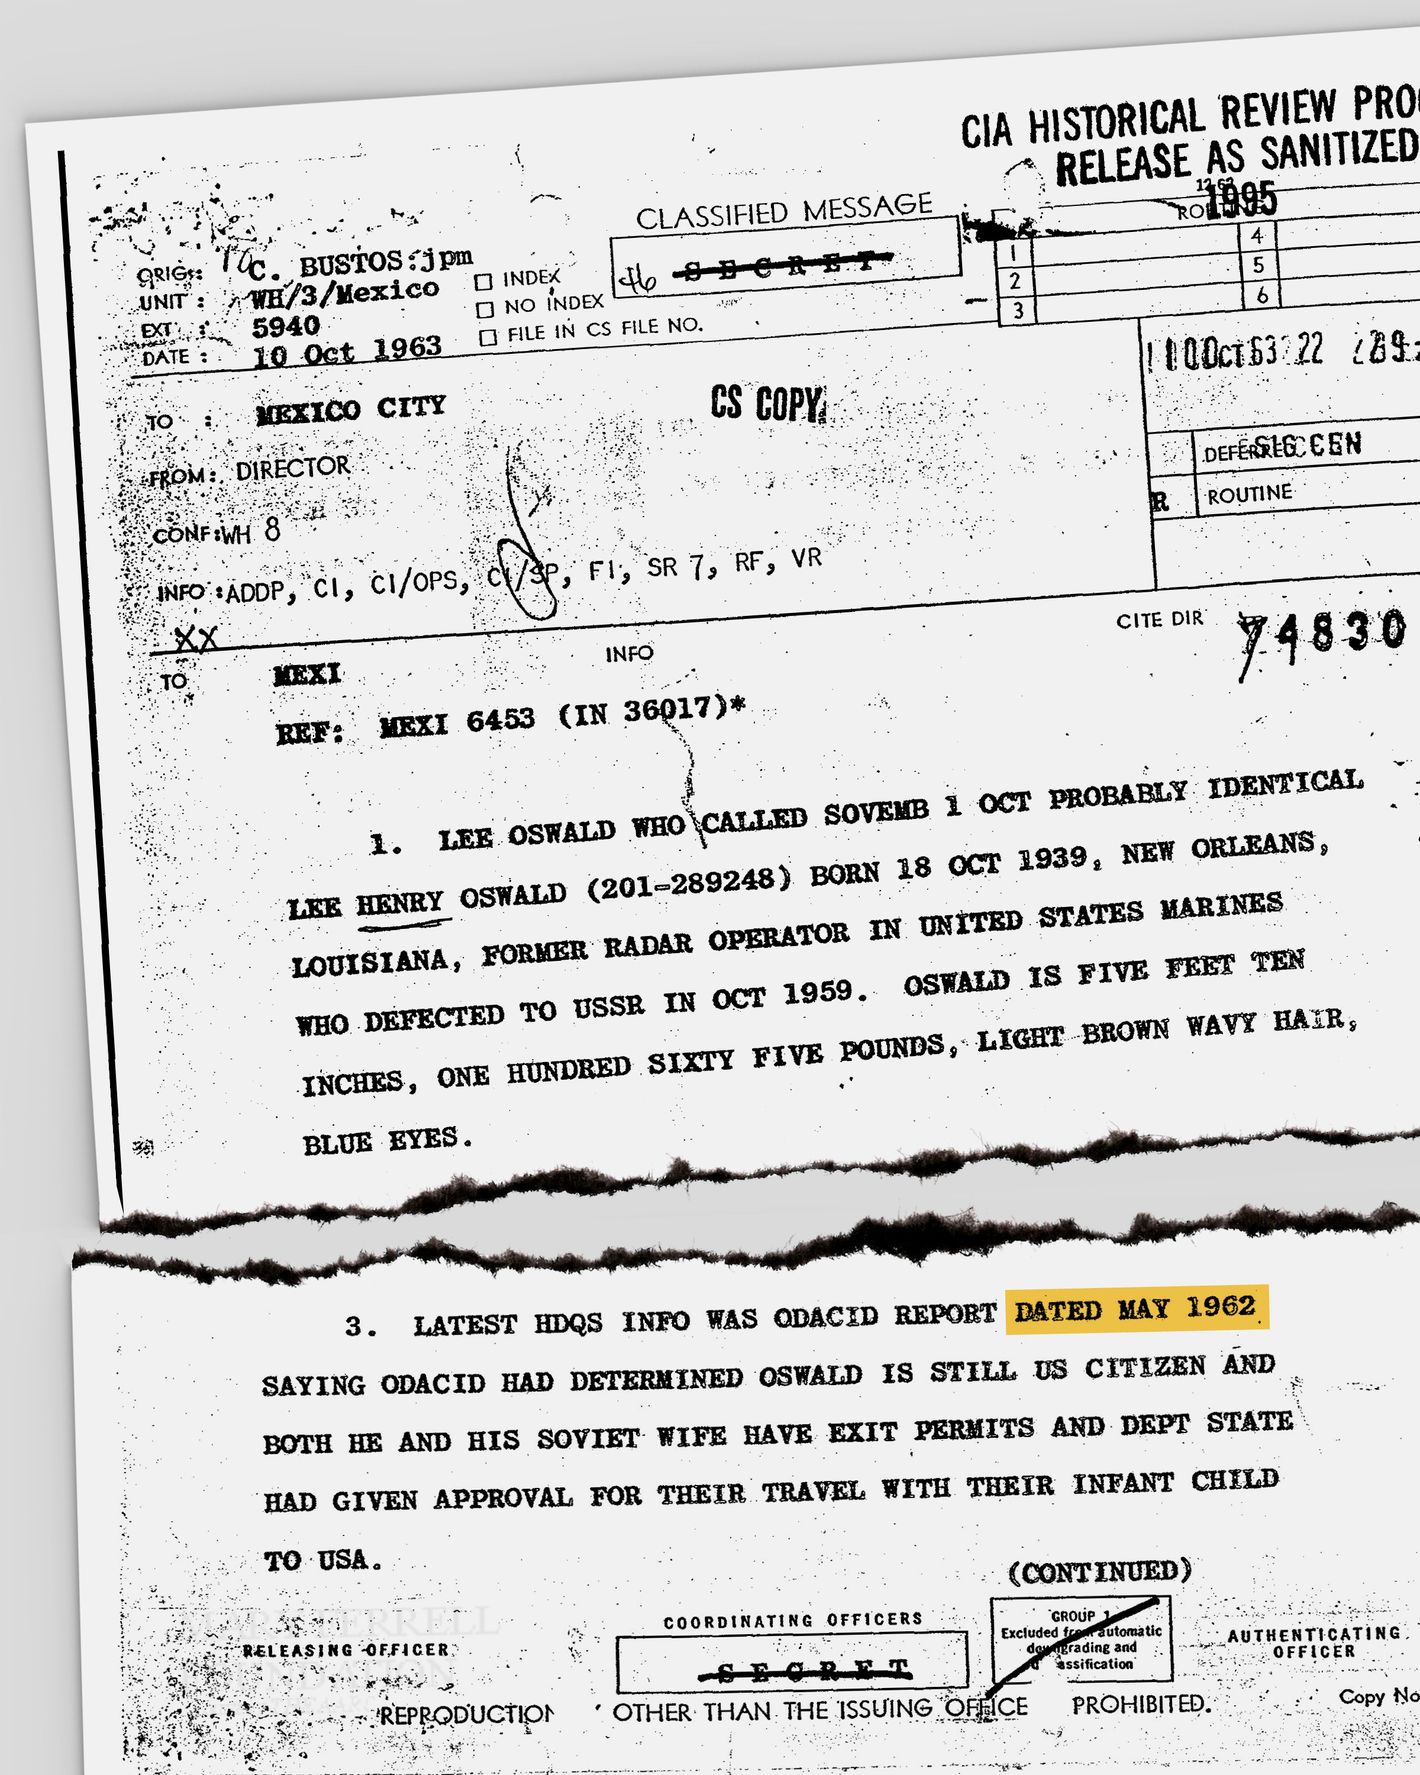 Deconstructed: What We Found In the New JFK Files